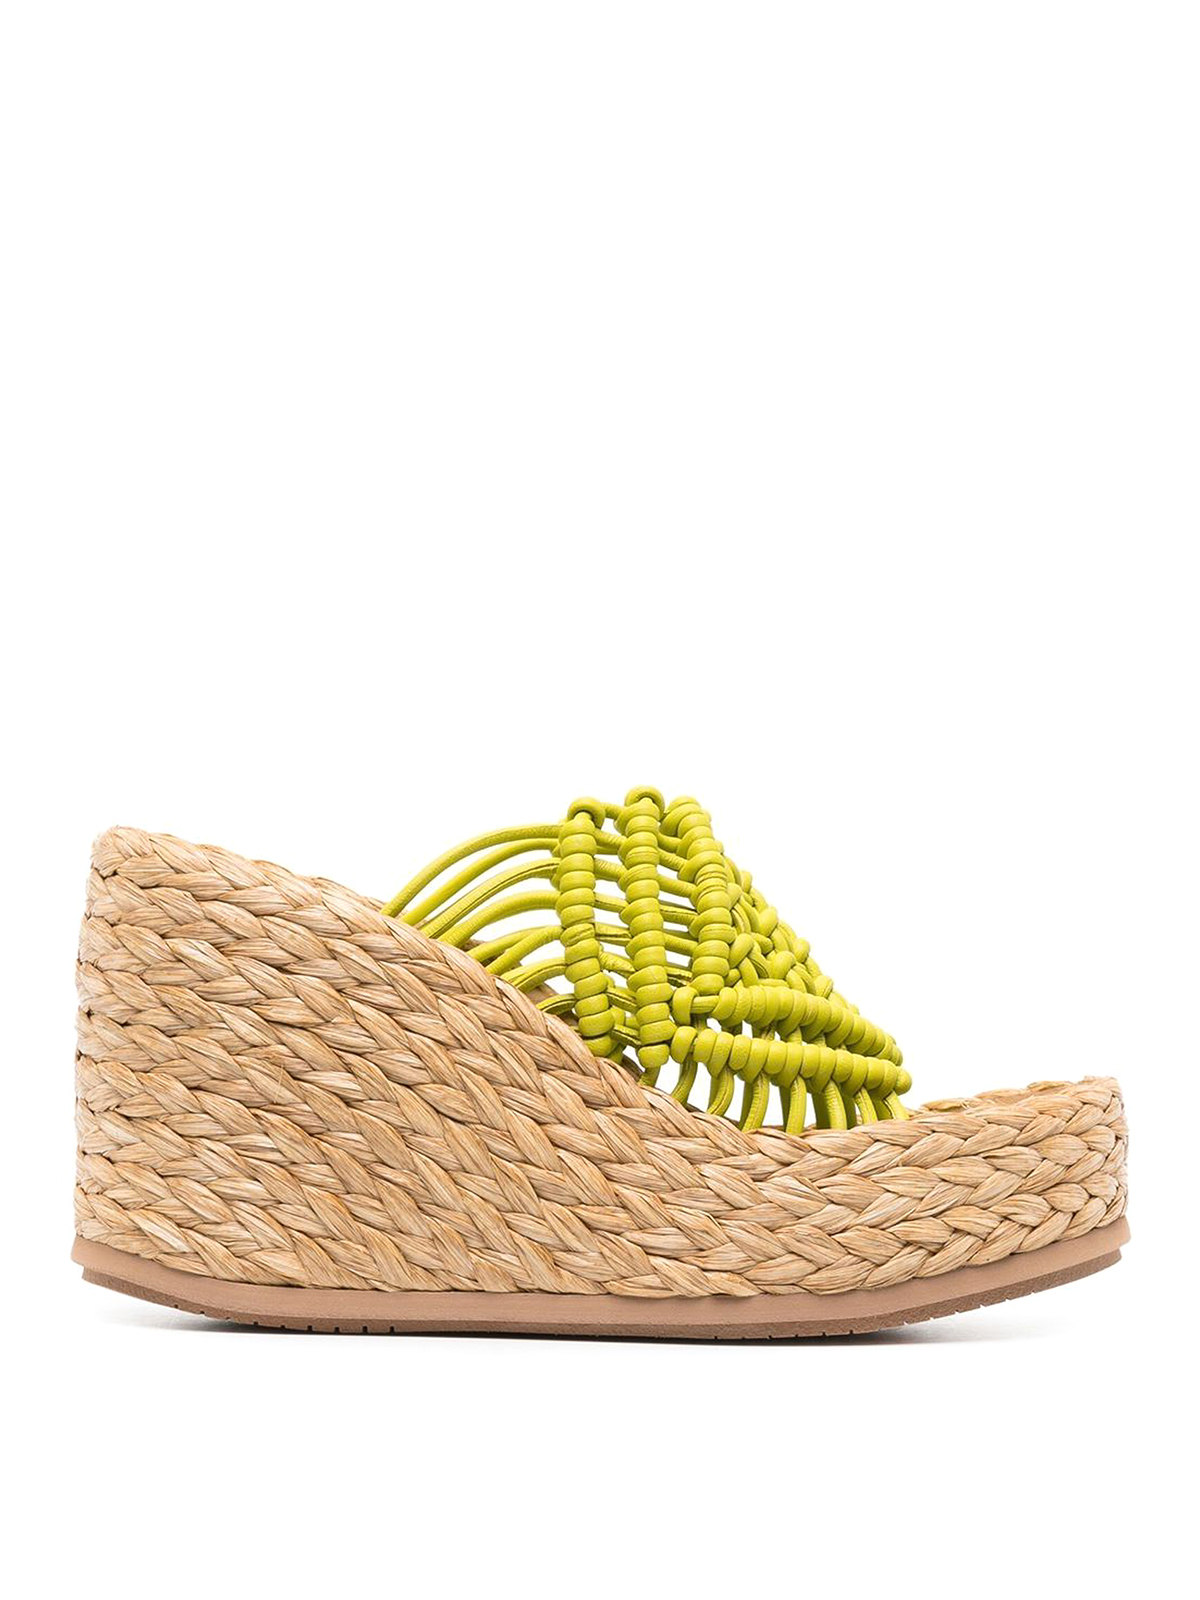 Paloma Barceló Interwovened Design Sandals In Green